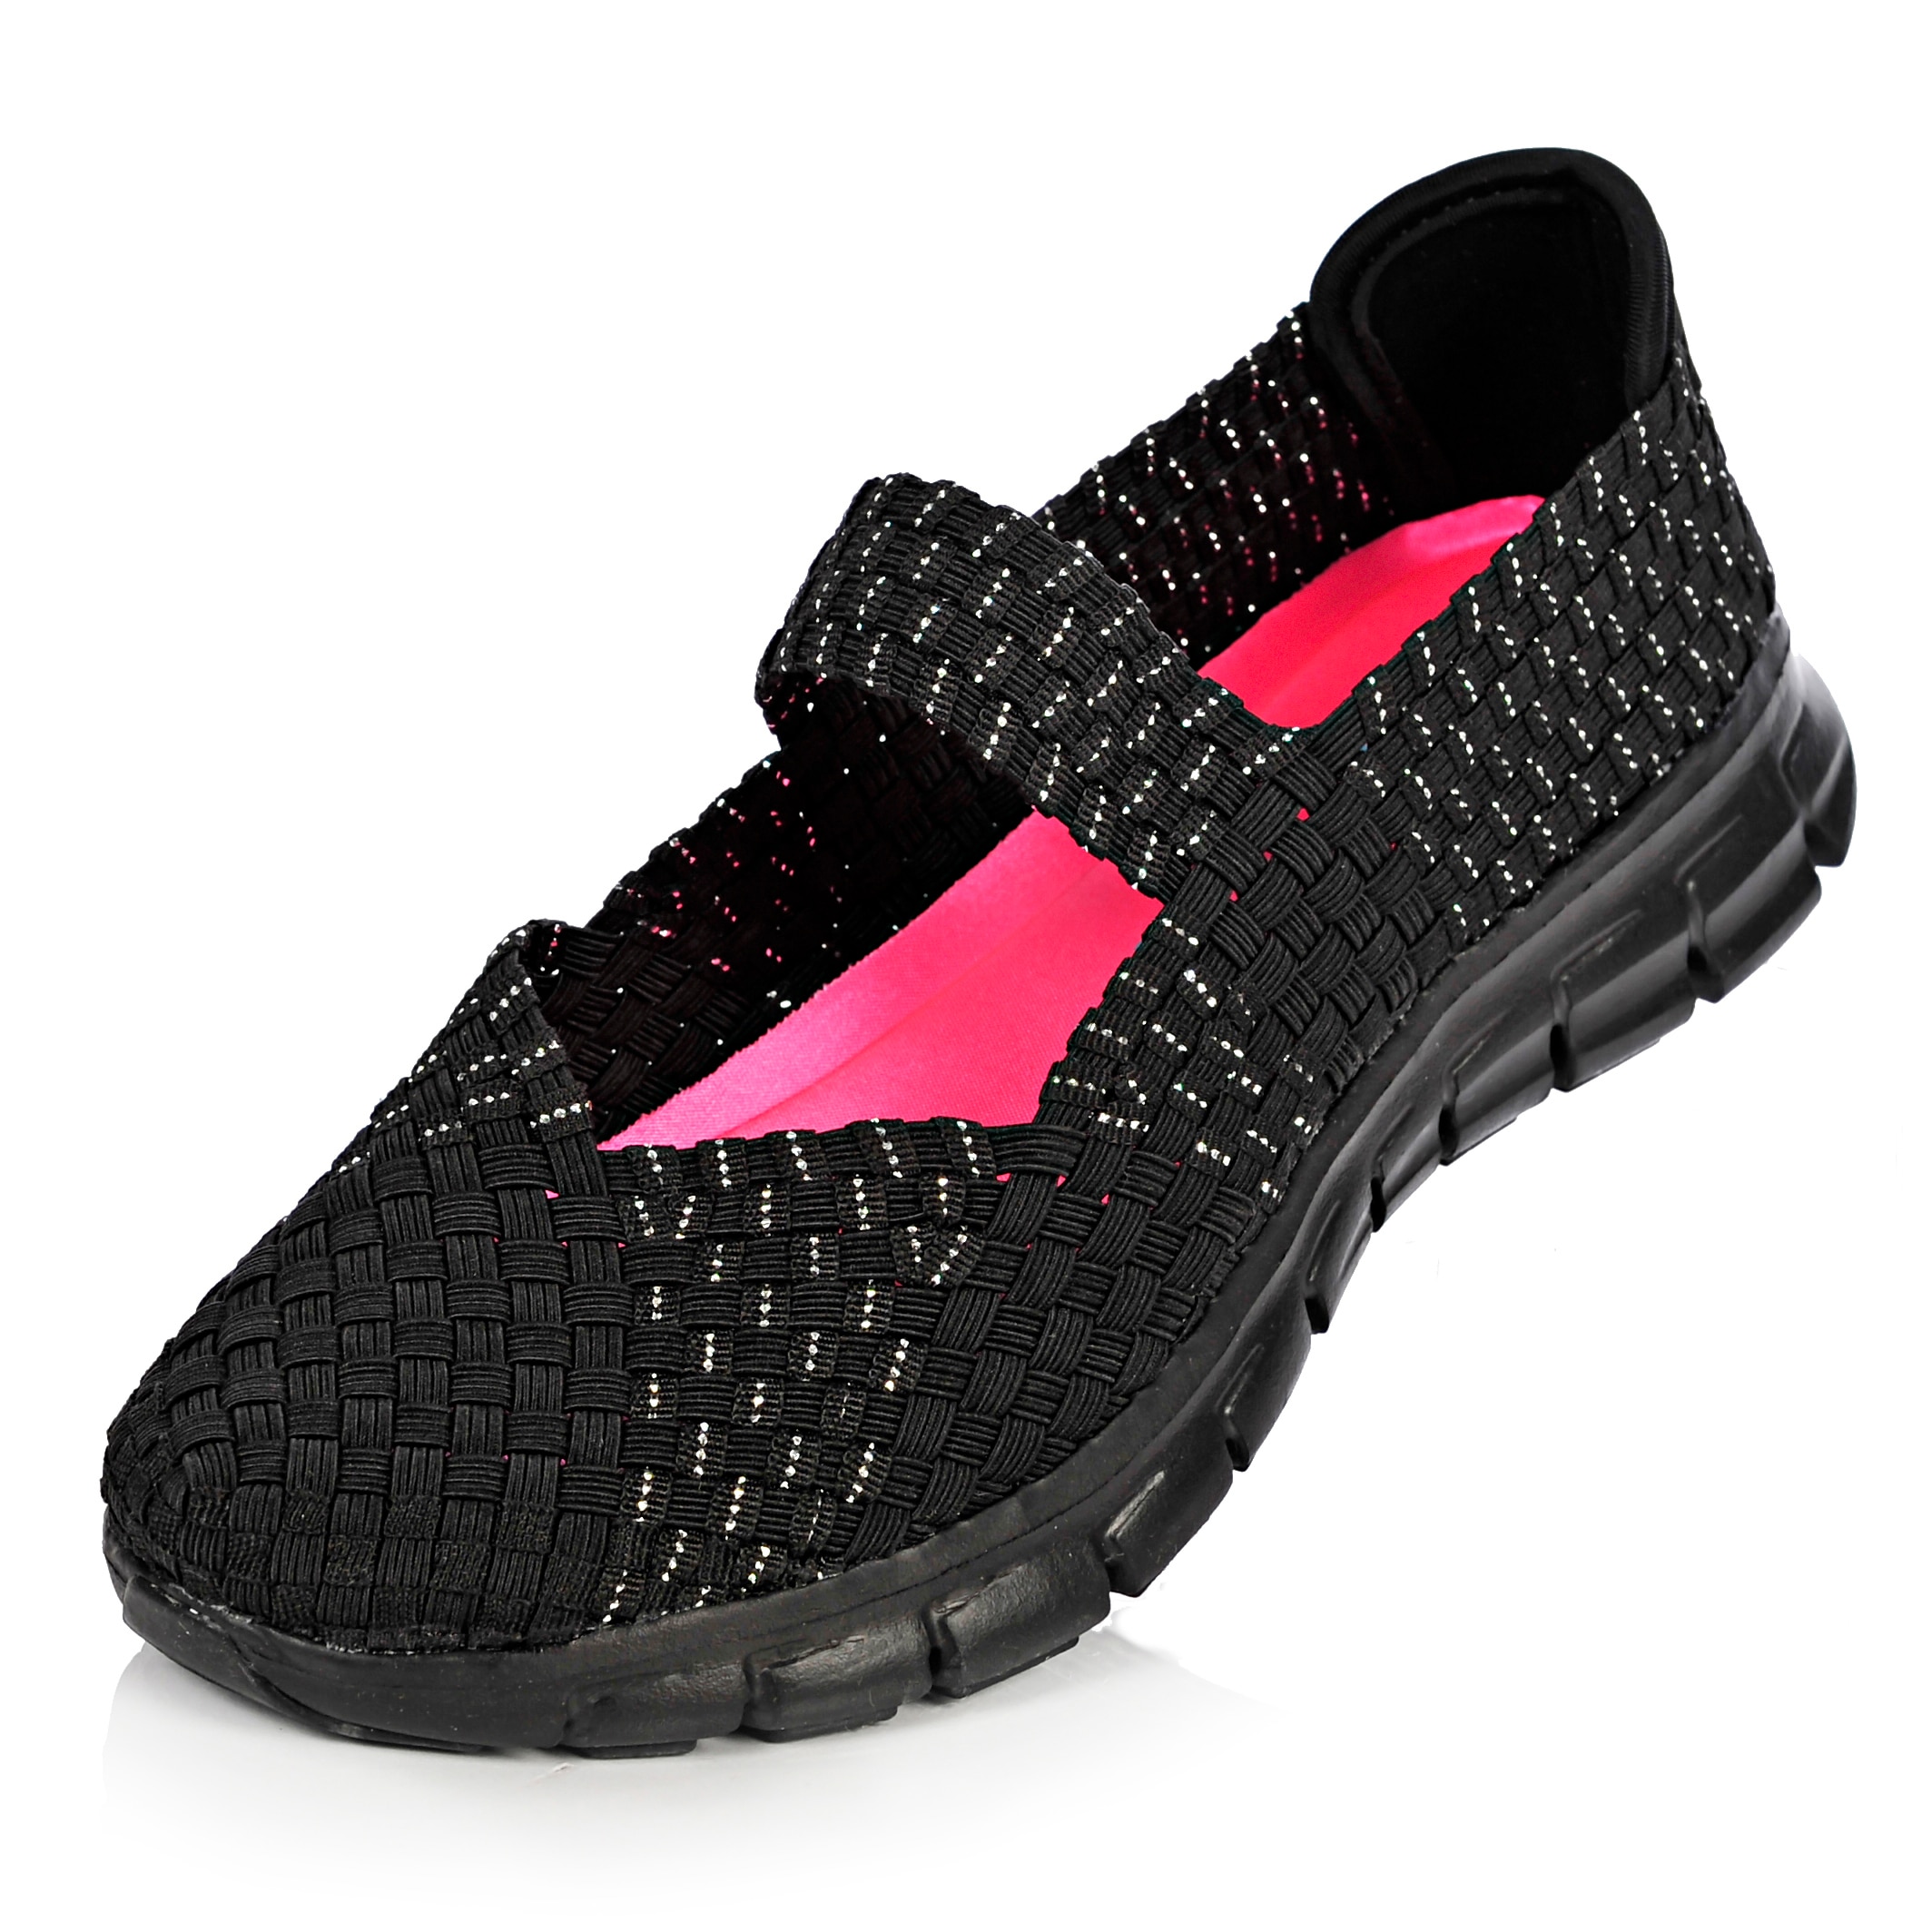 skechers woven elastic shoes Sale,up to 